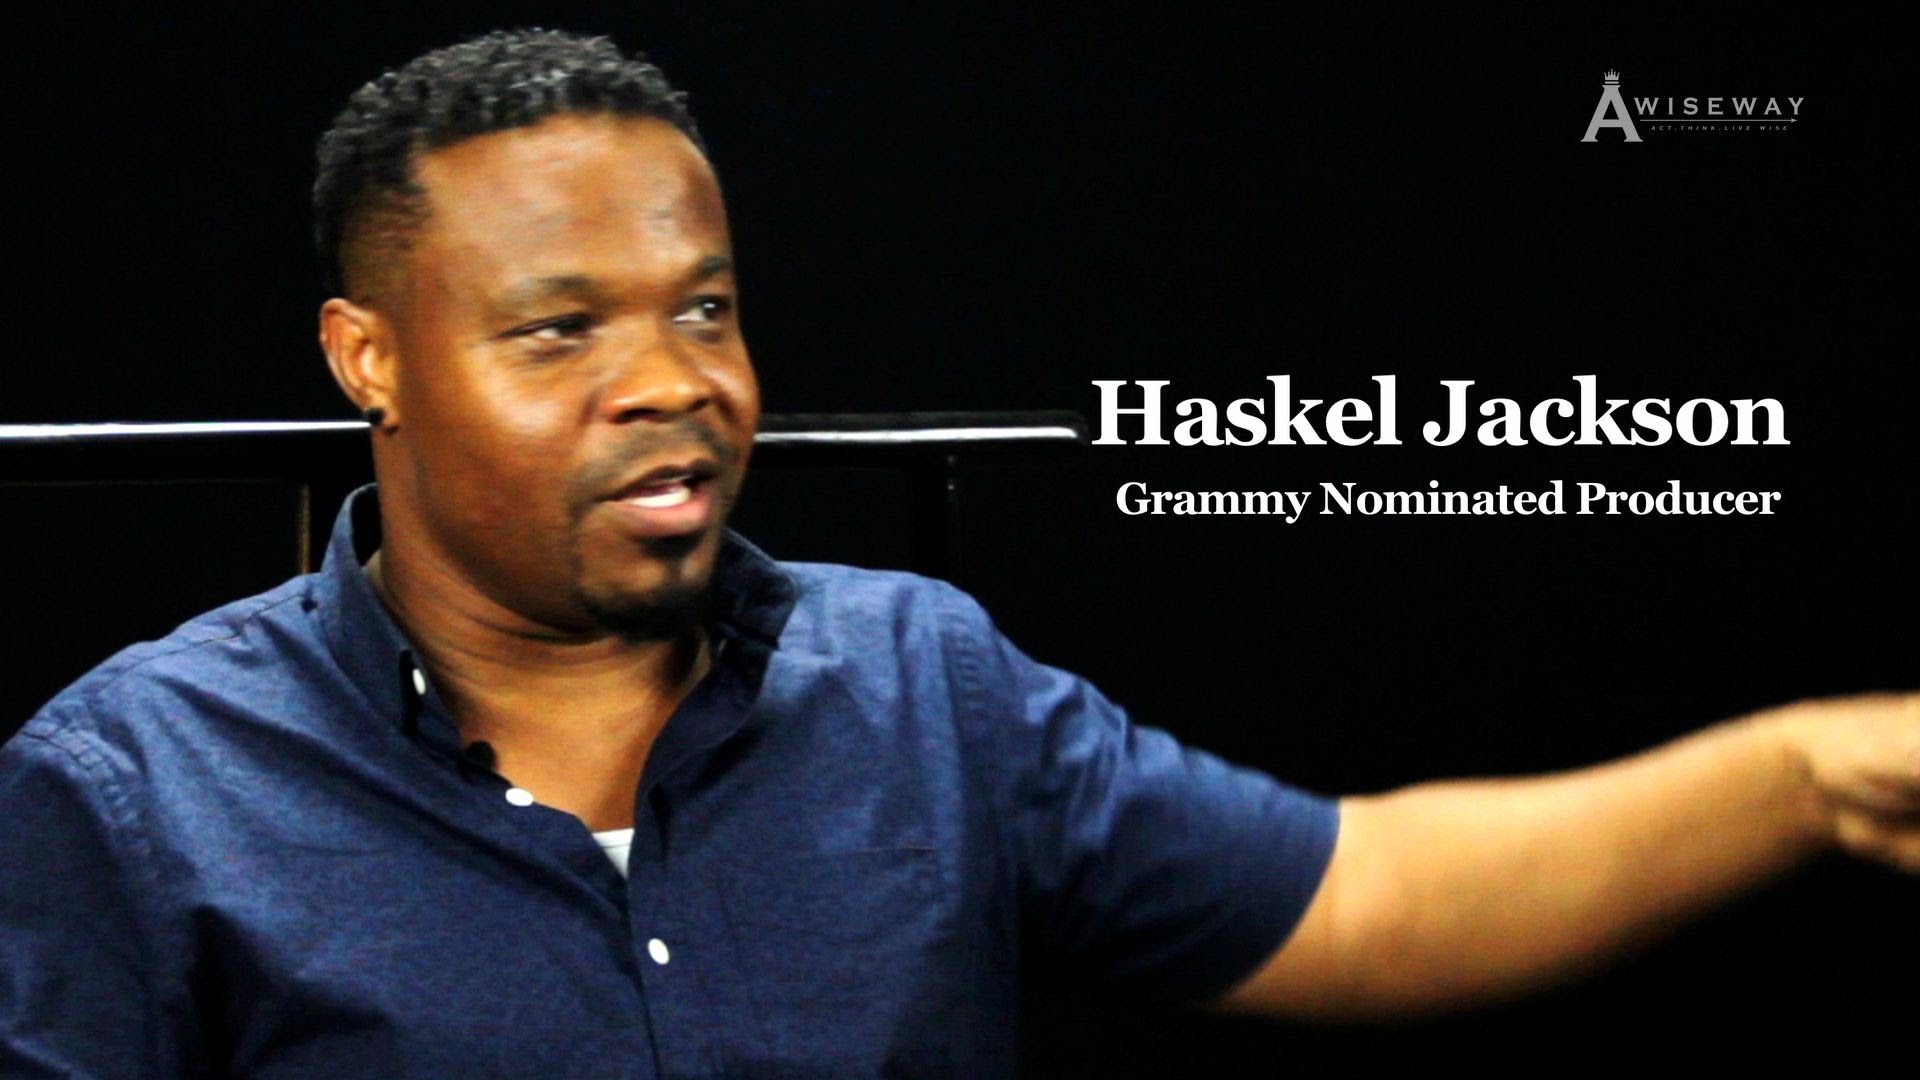 Grammy Nominated Producer Says How He Felt When Nominated for Grammy